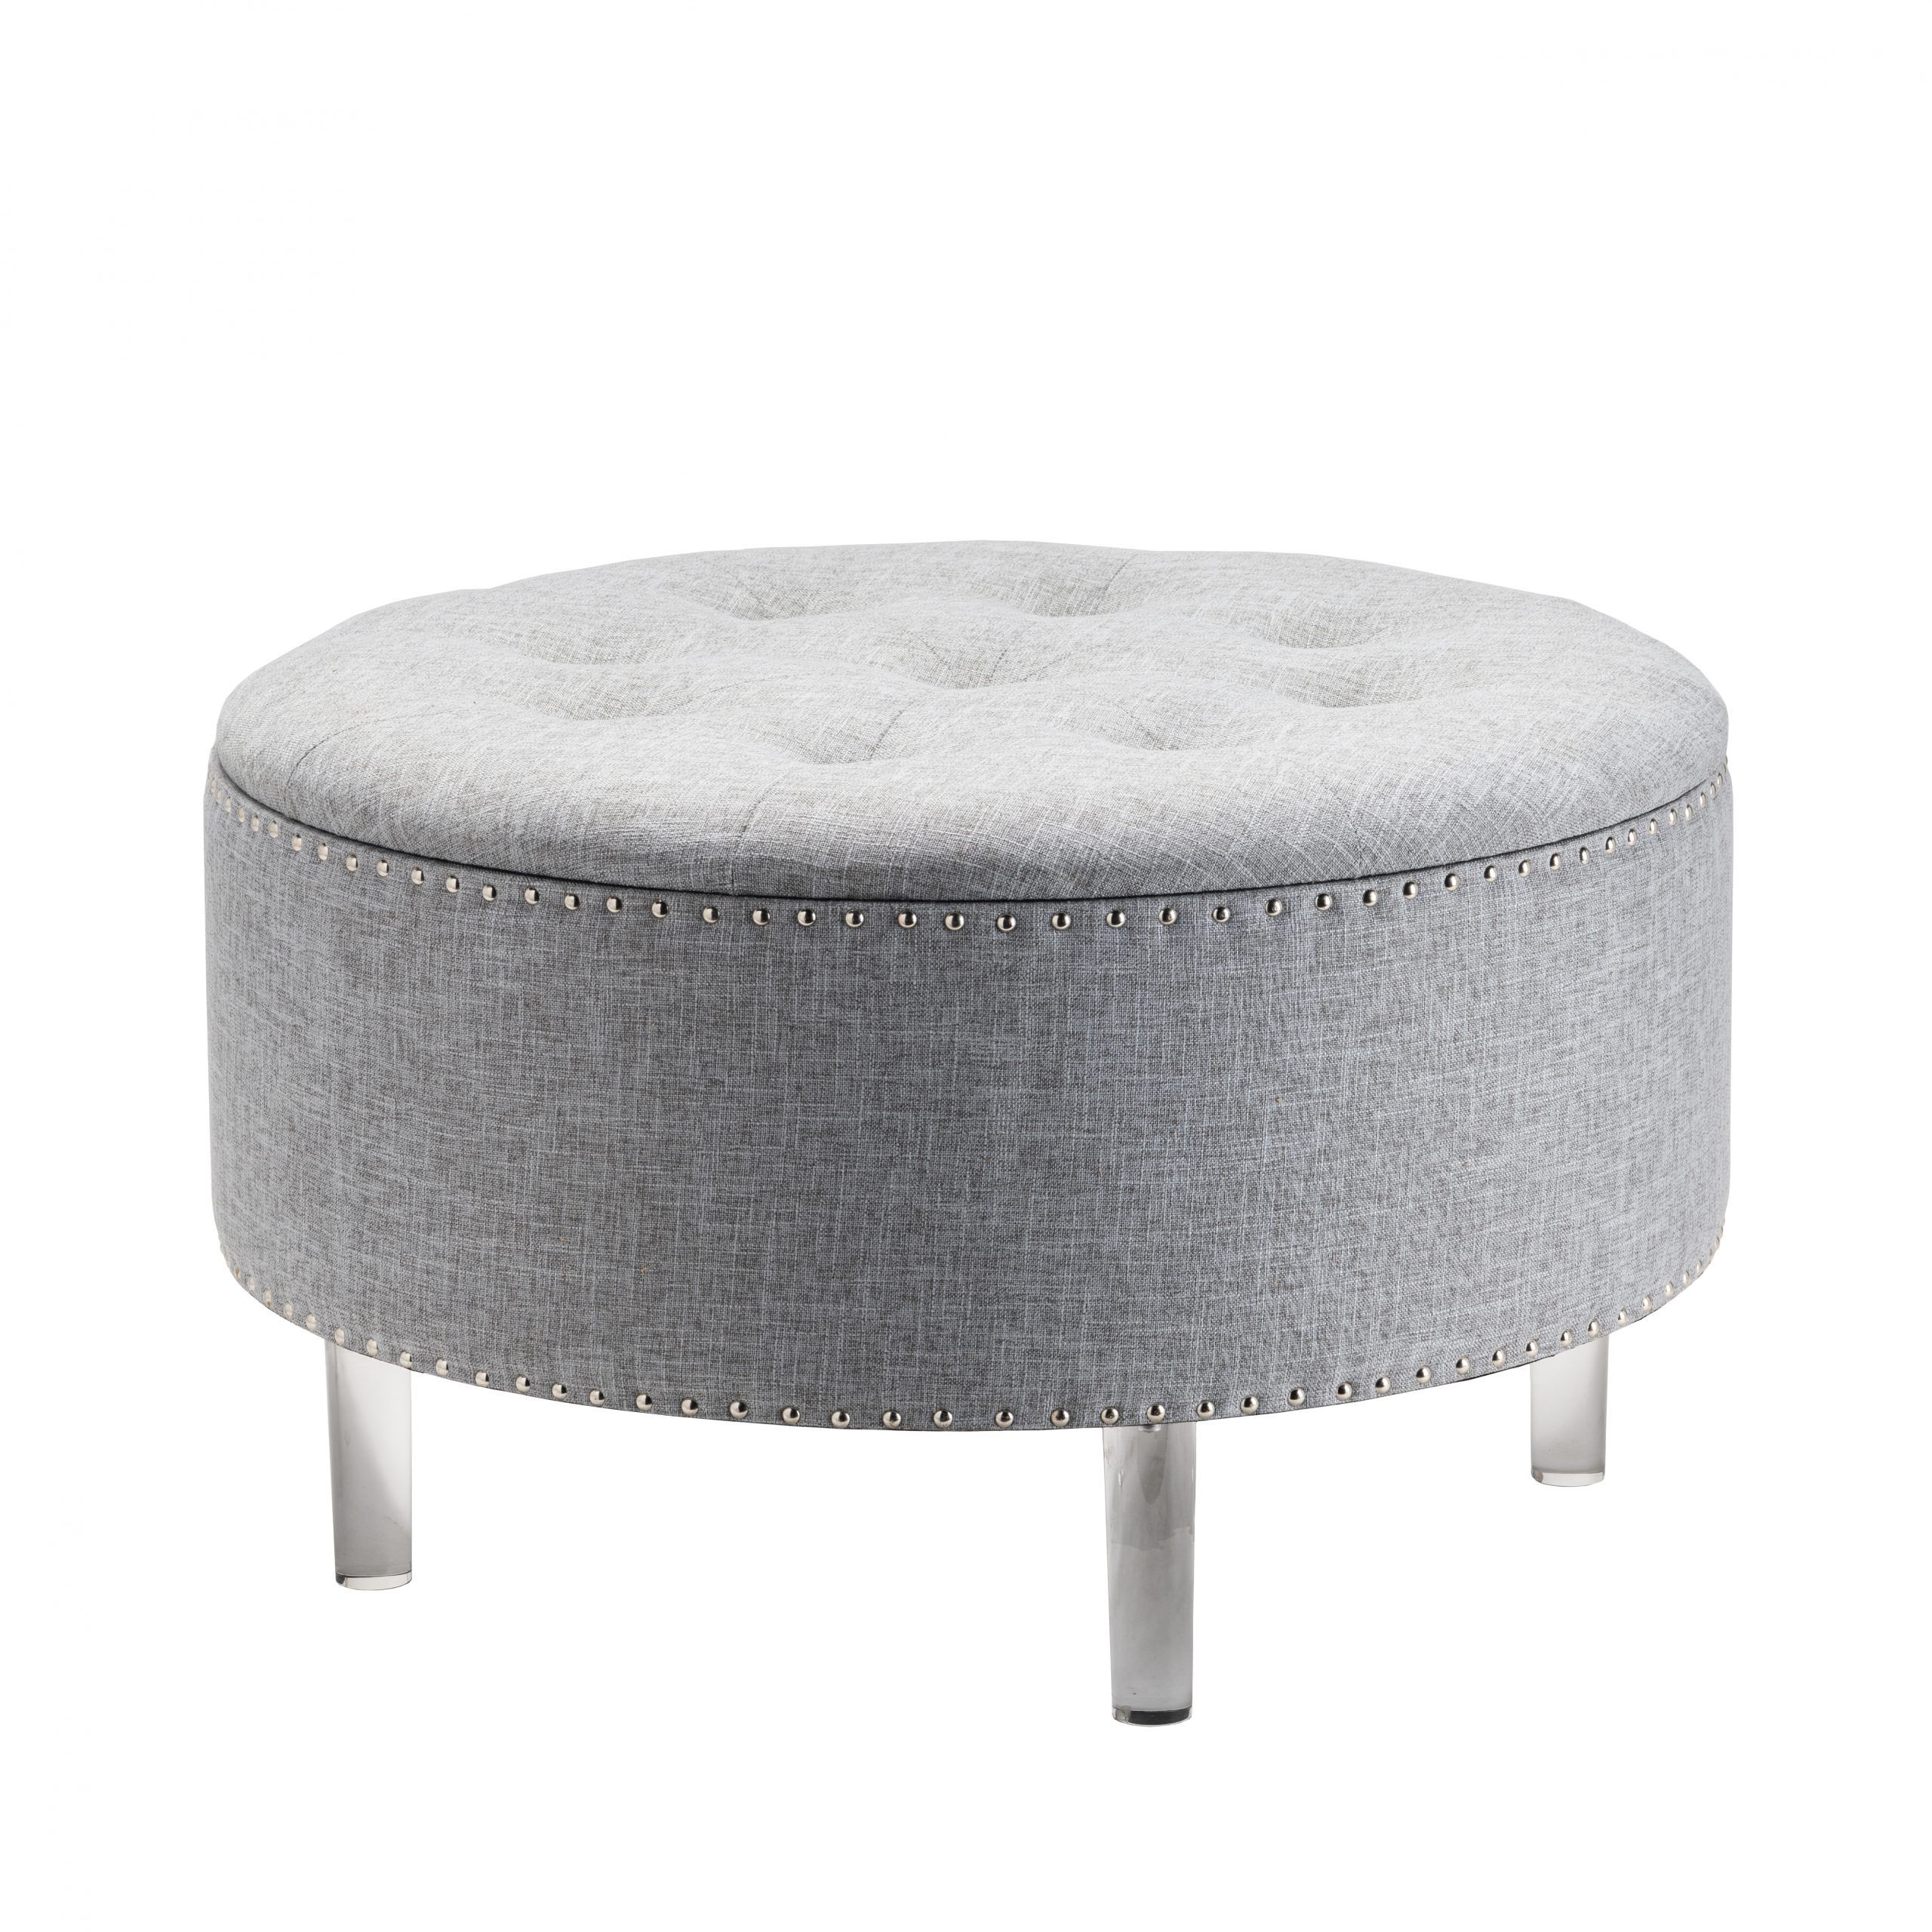 Fabric Tufted Round Storage Ottomans For Well Known Caroline Gray Tufted Round Storage Ottoman – Walmart – Walmart (View 7 of 10)